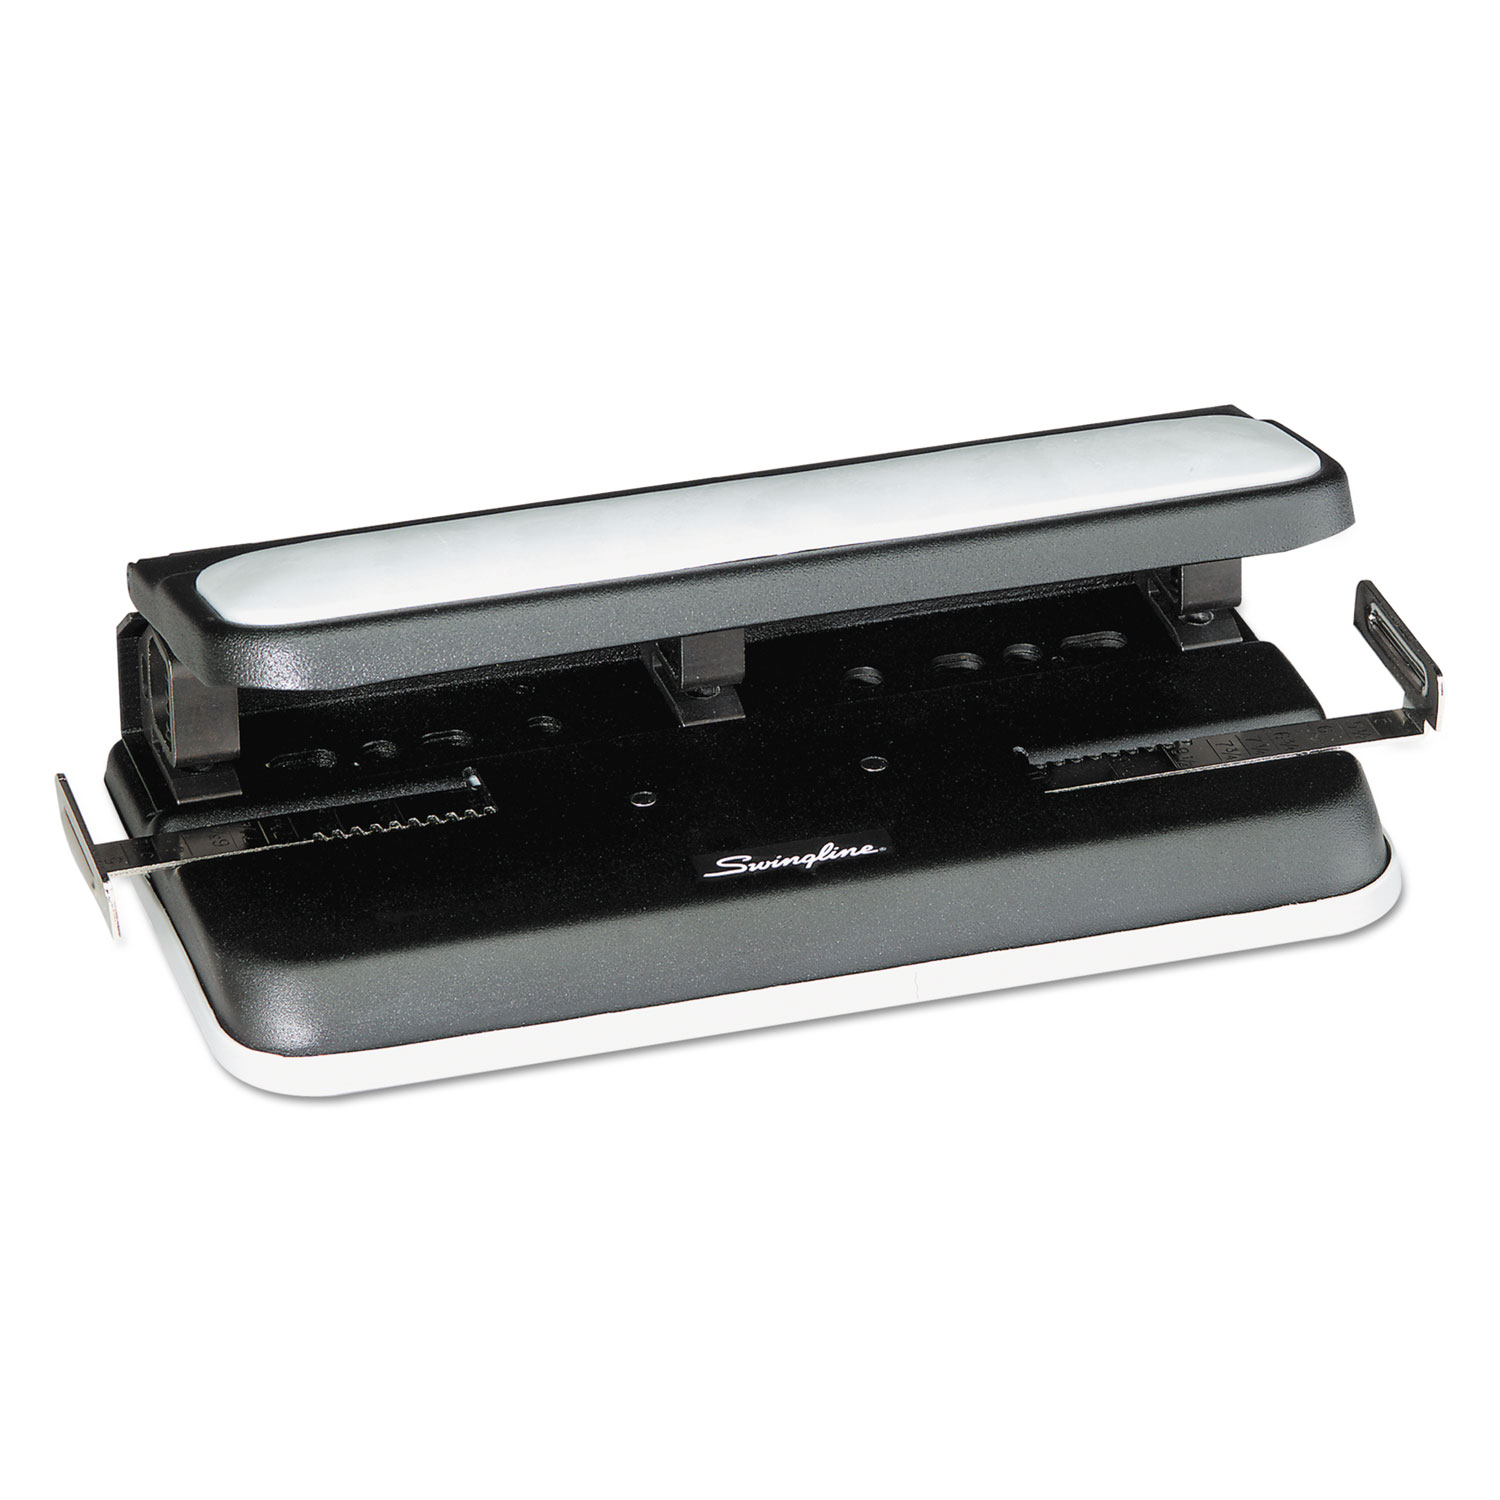  Swingline A7074300E 32-Sheet Easy Touch Two-to-Three-Hole Punch, 9/32 Holes, Black/Gray (SWI74300) 